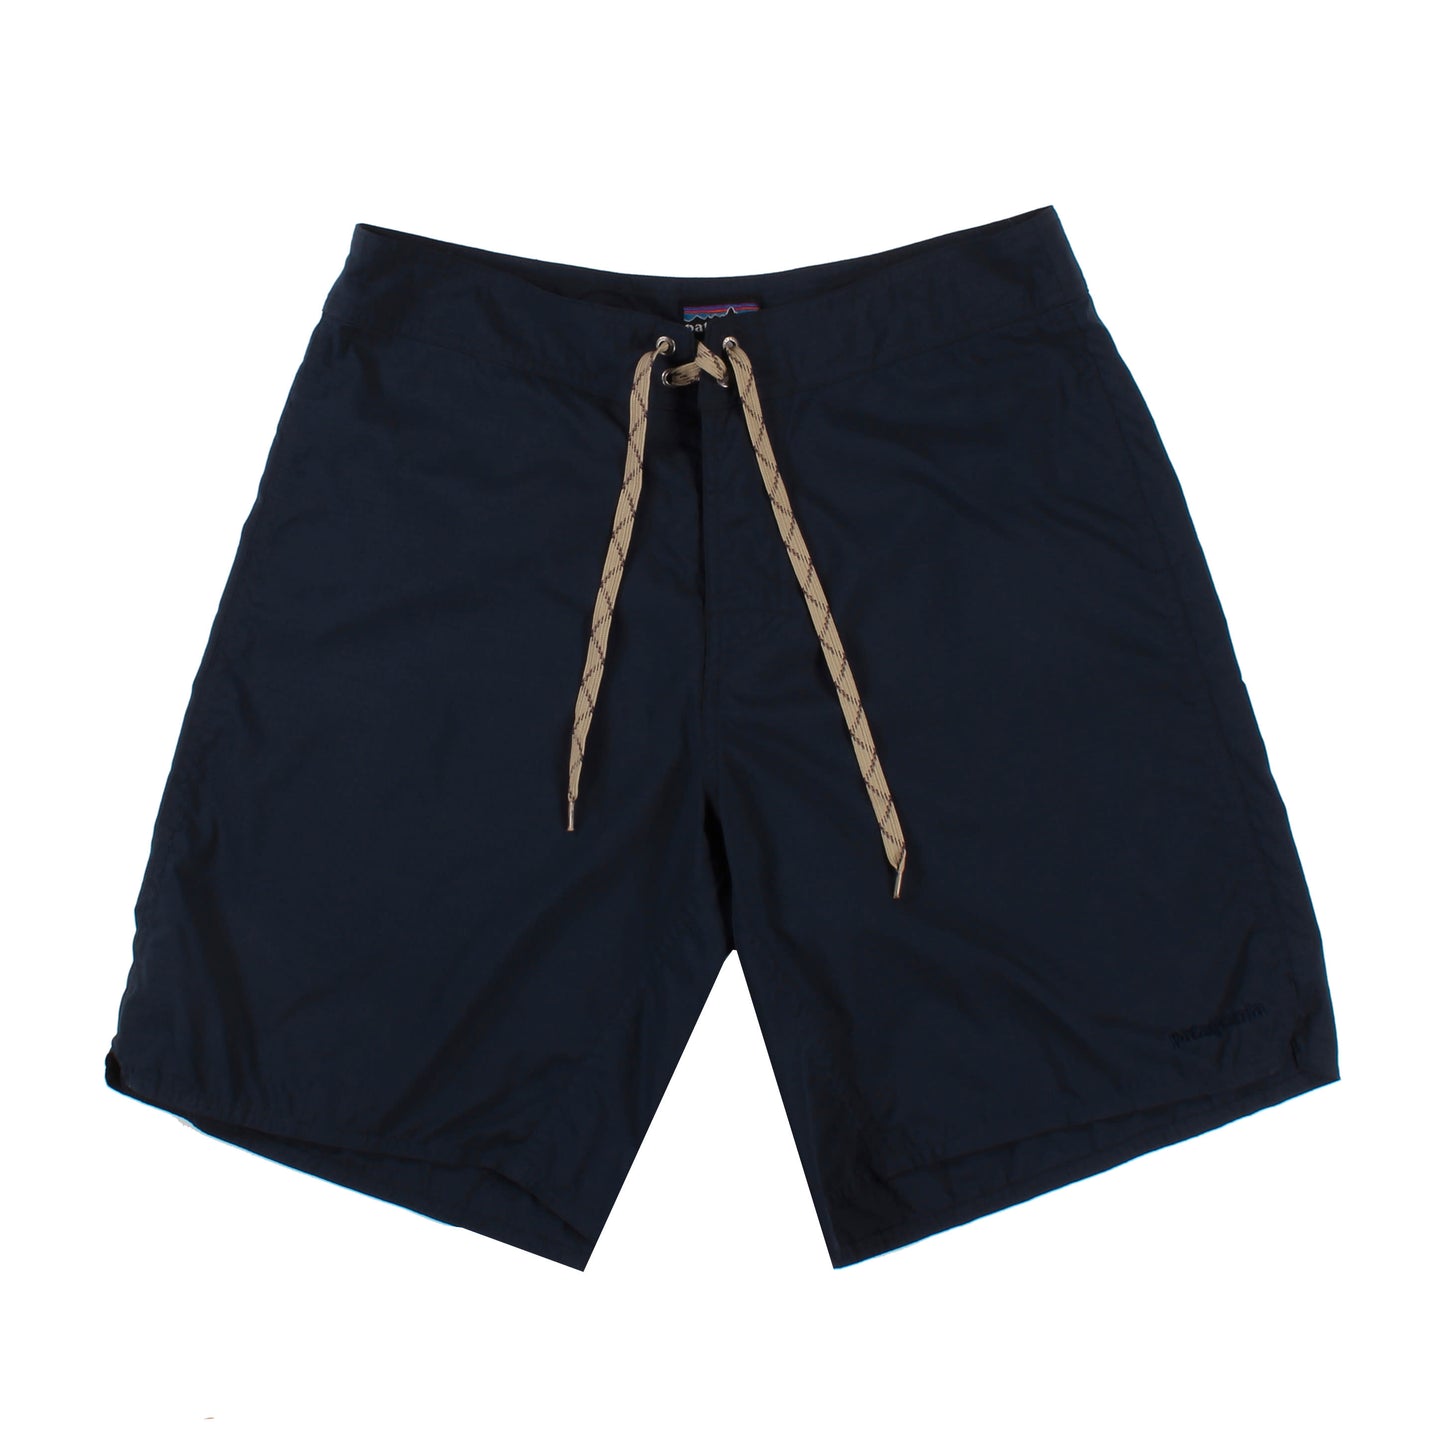 M's Light and Variable Surf Trunks